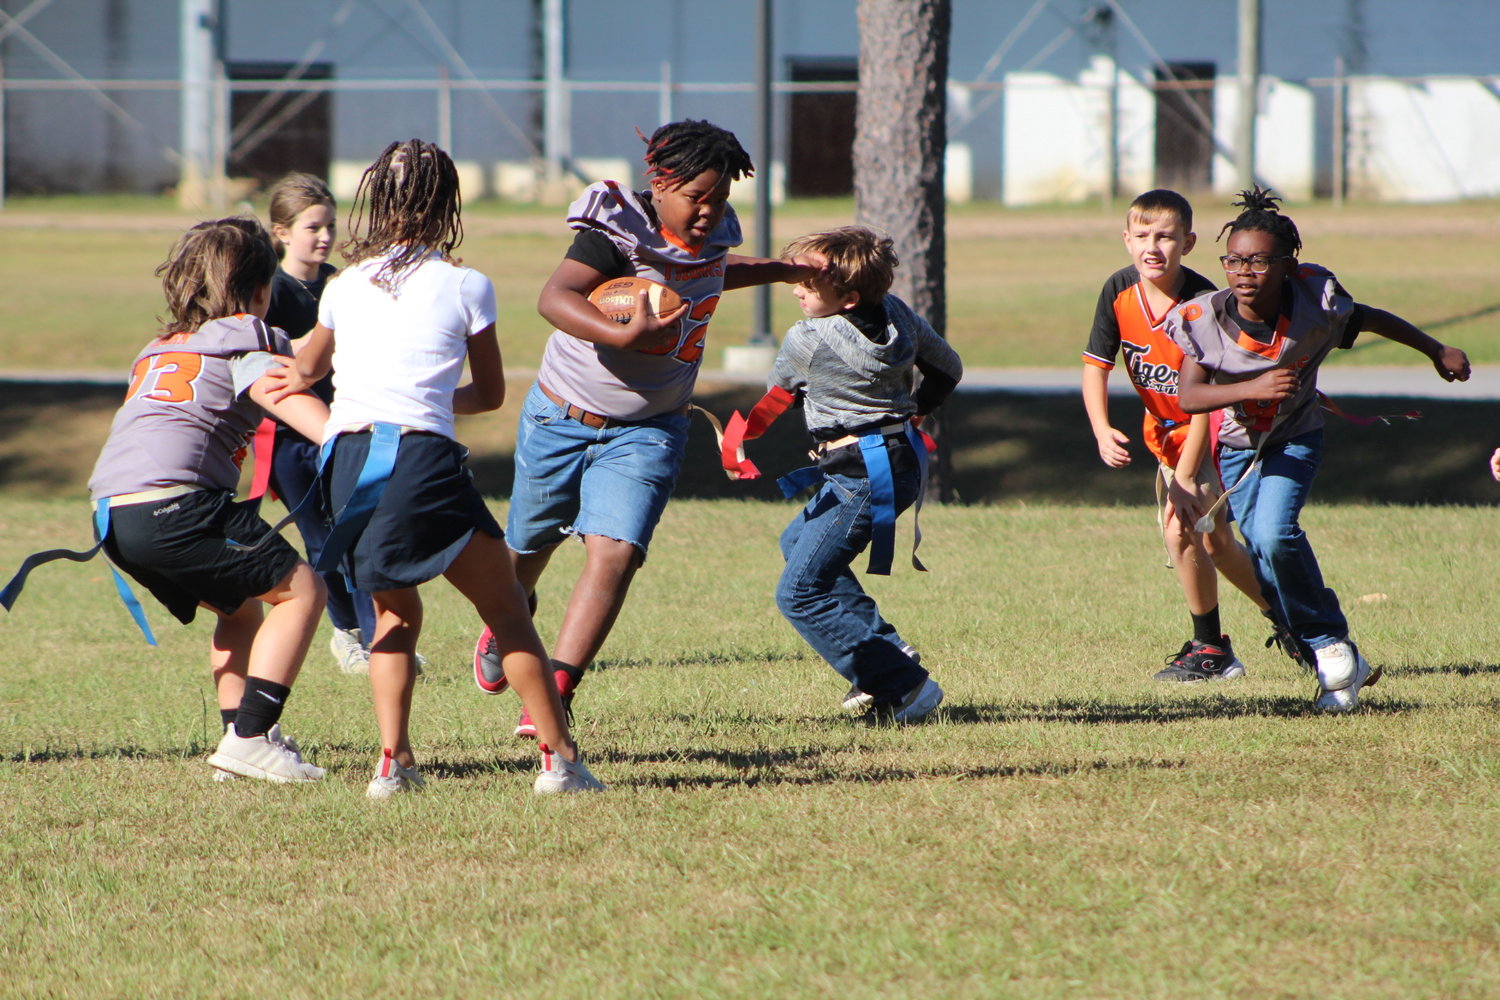 Bay Minette Elementary Schoolers have kicked off the flag football playoffs to culminate the nine-week regular season. Student-athletes from all grades will compete to find a champion.